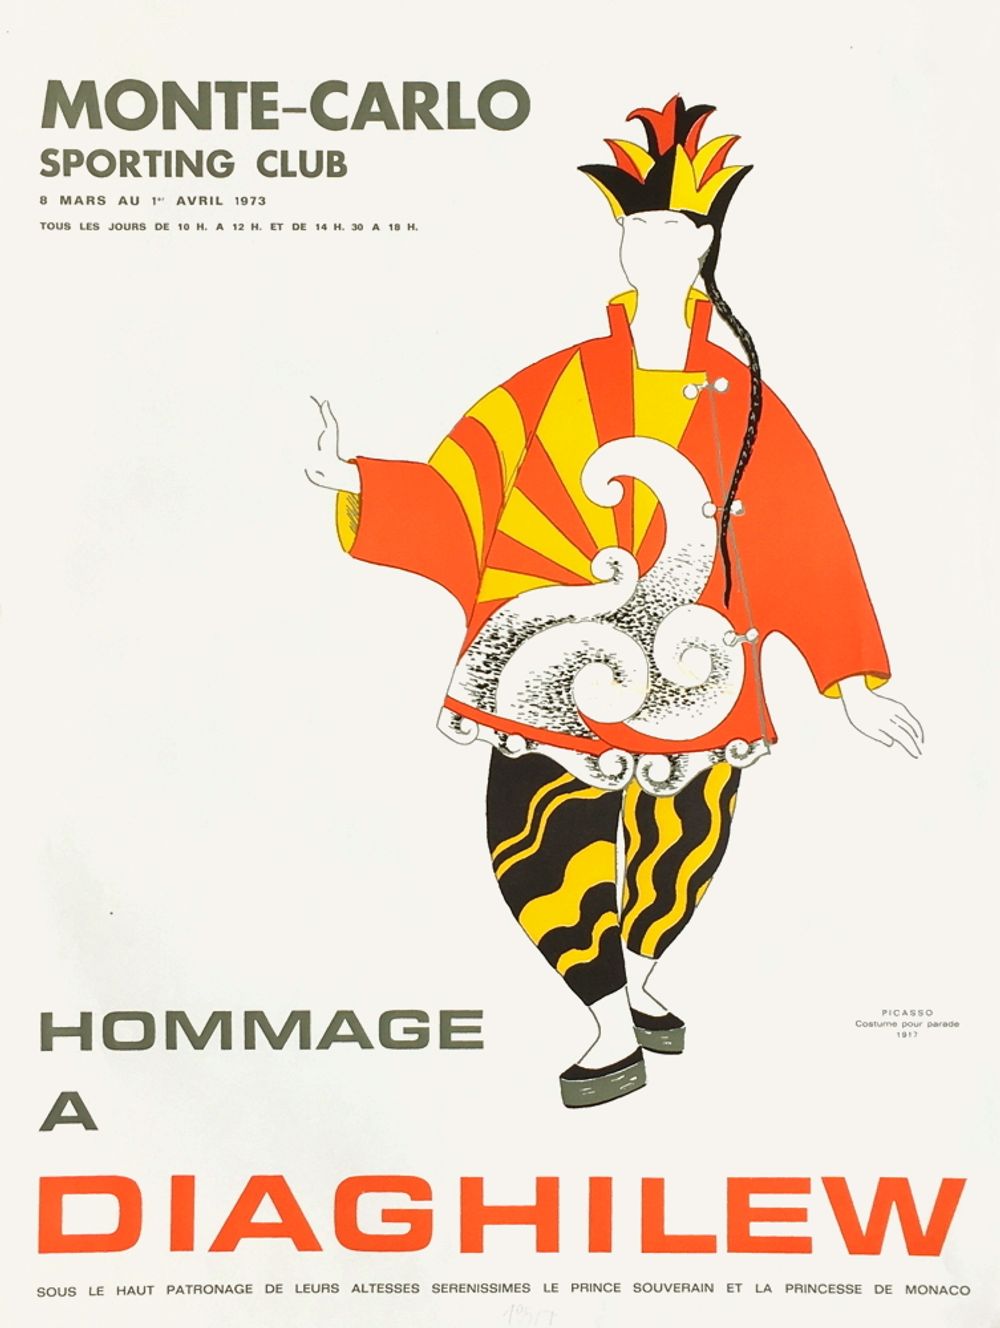 Expo 73 - Monte Carlo Sporting Club - Hommage à Diaghilew